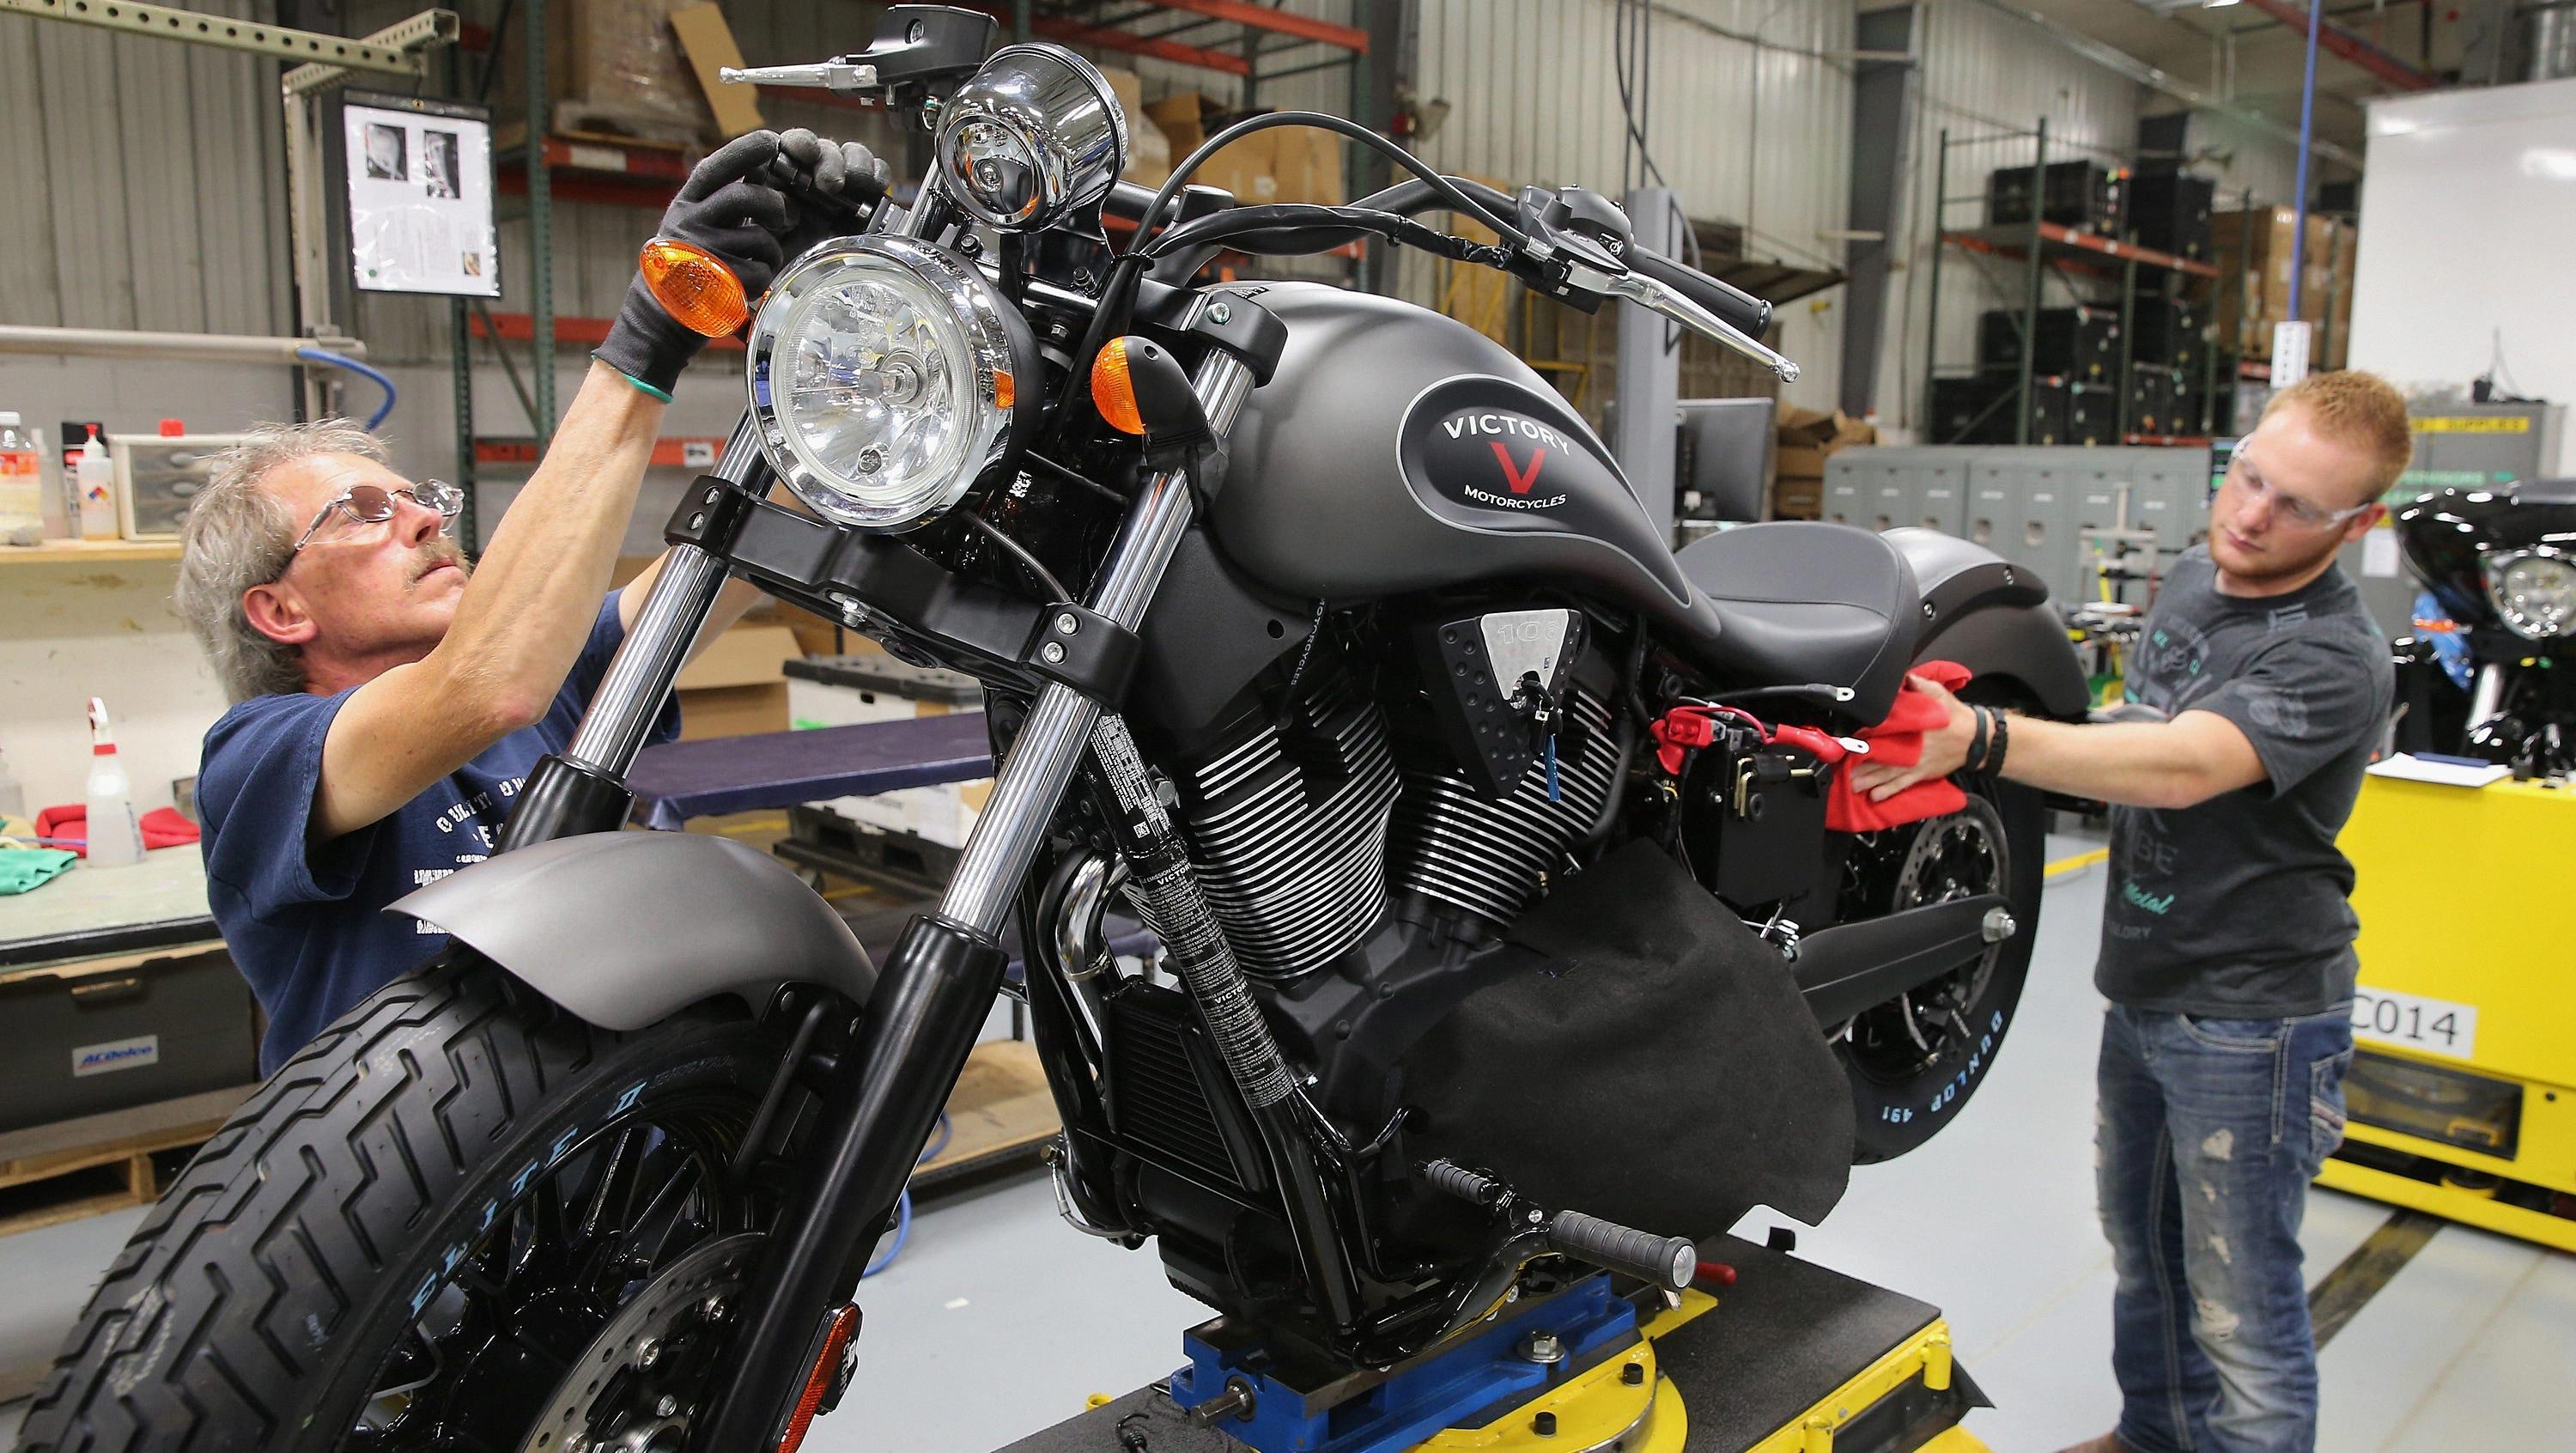 who makes victory motorcycles